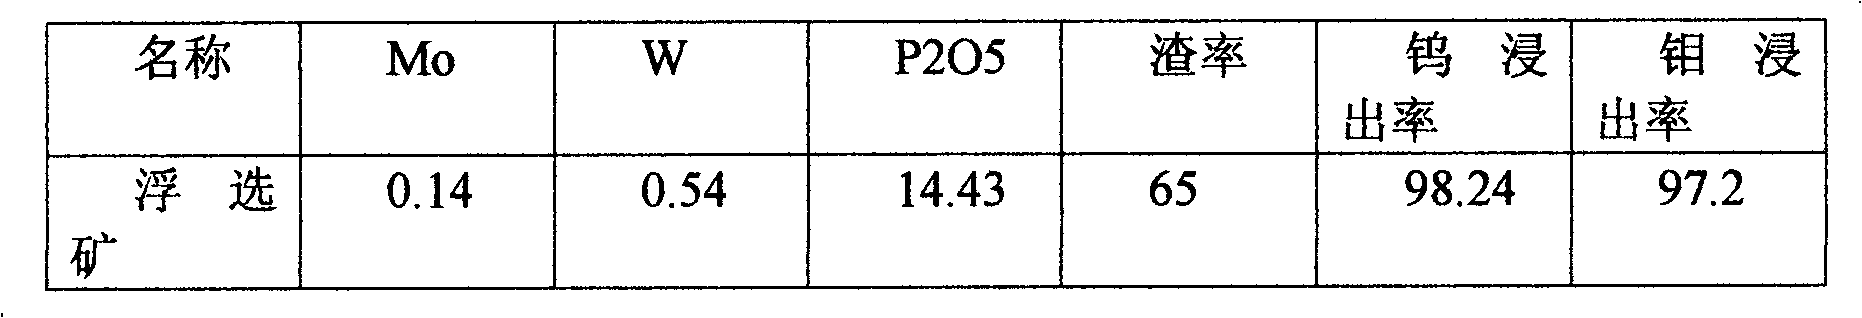 Method for producing tungsten and molybdenum products by processing tungsten and molybdenum symbiotic mixed ore